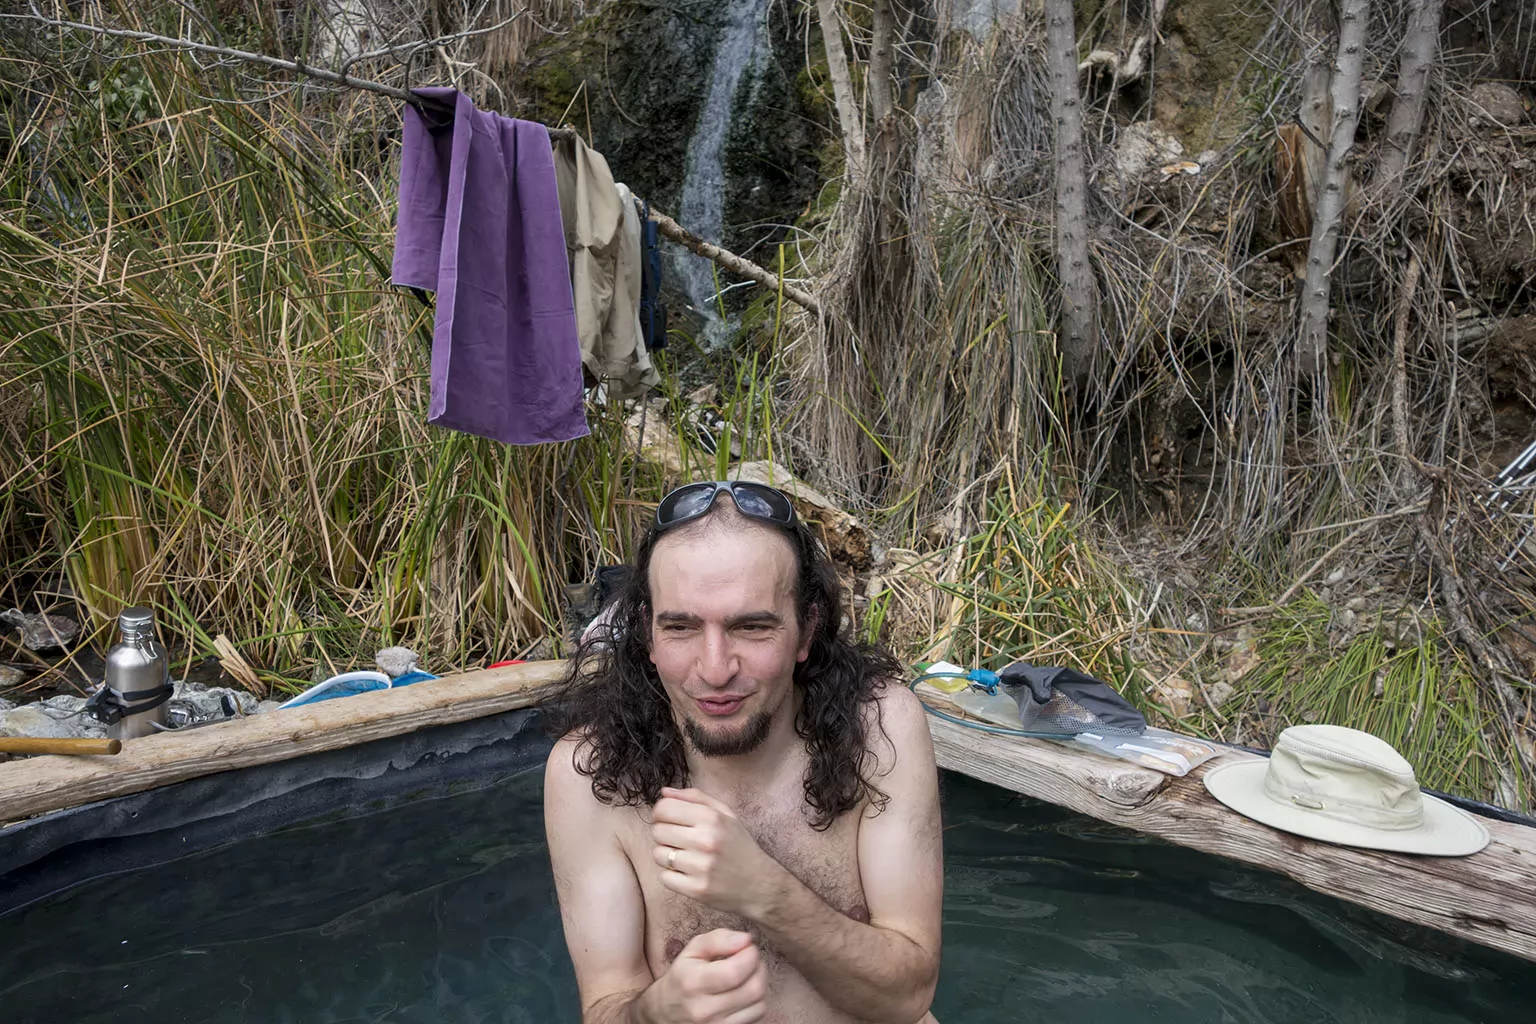 Yours truly - truly enjoying the hot tub